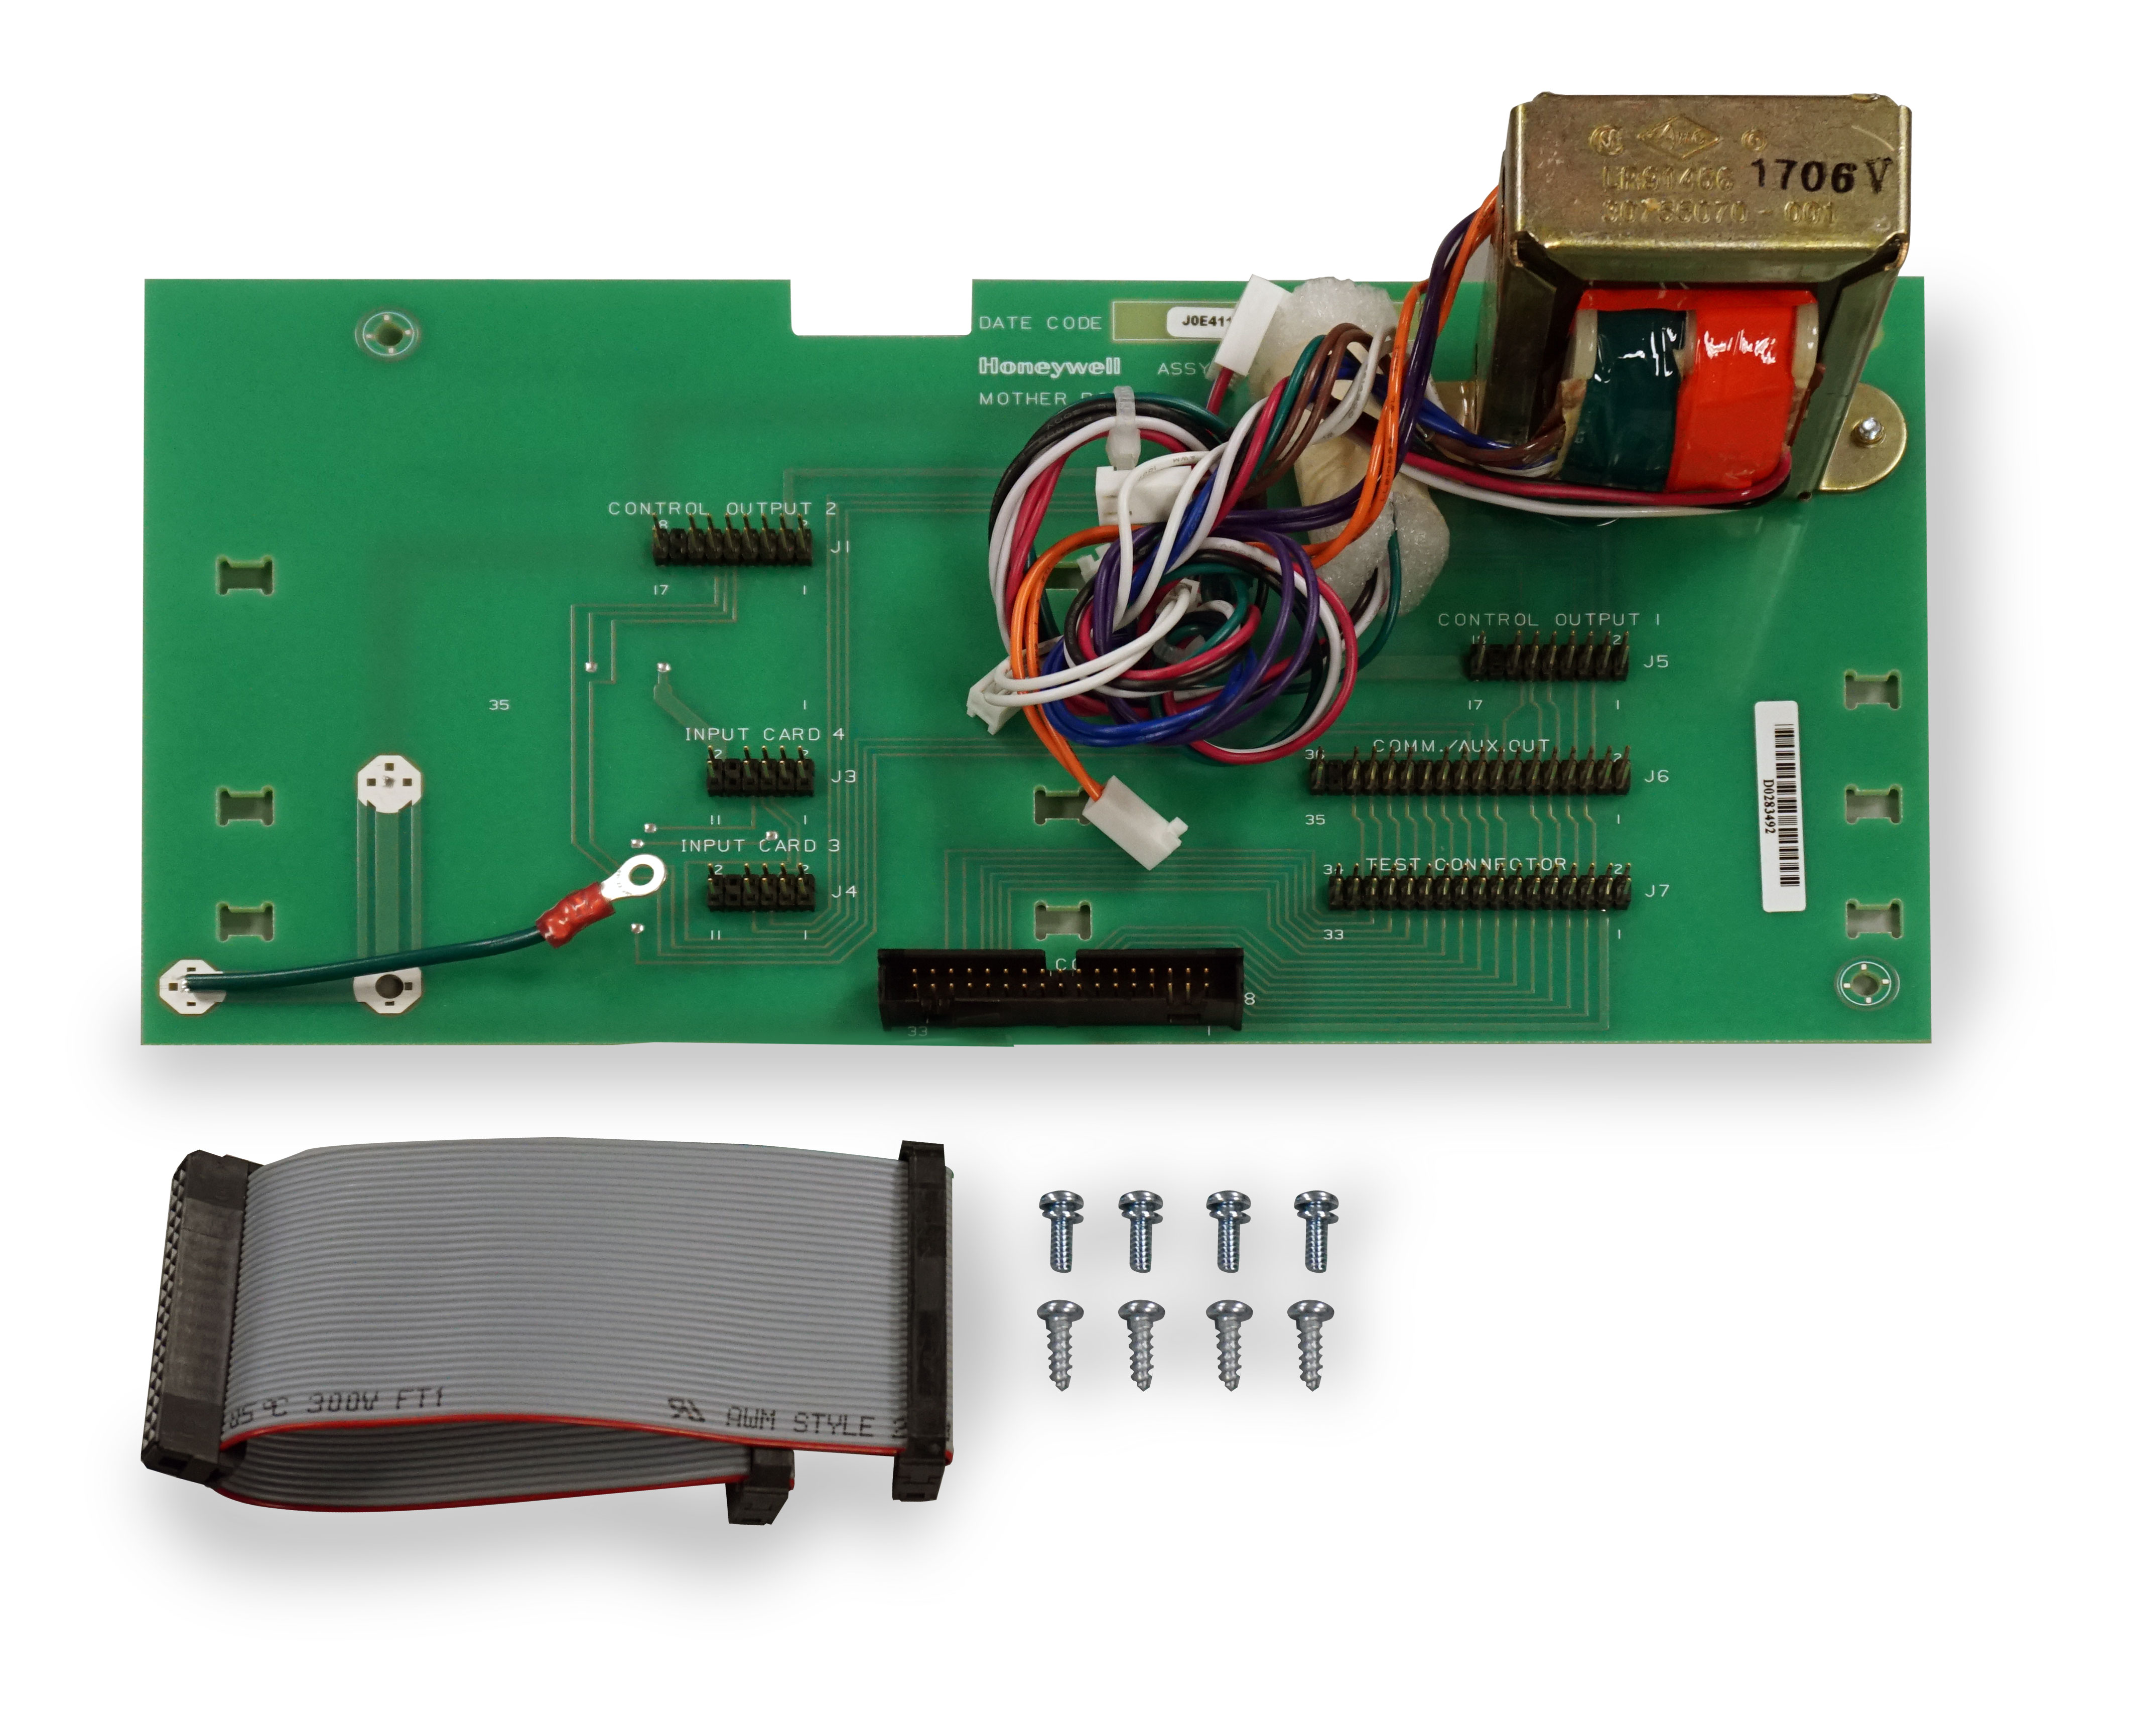 BN-HONEYWELL MOTHER BOARD FOR DR4500